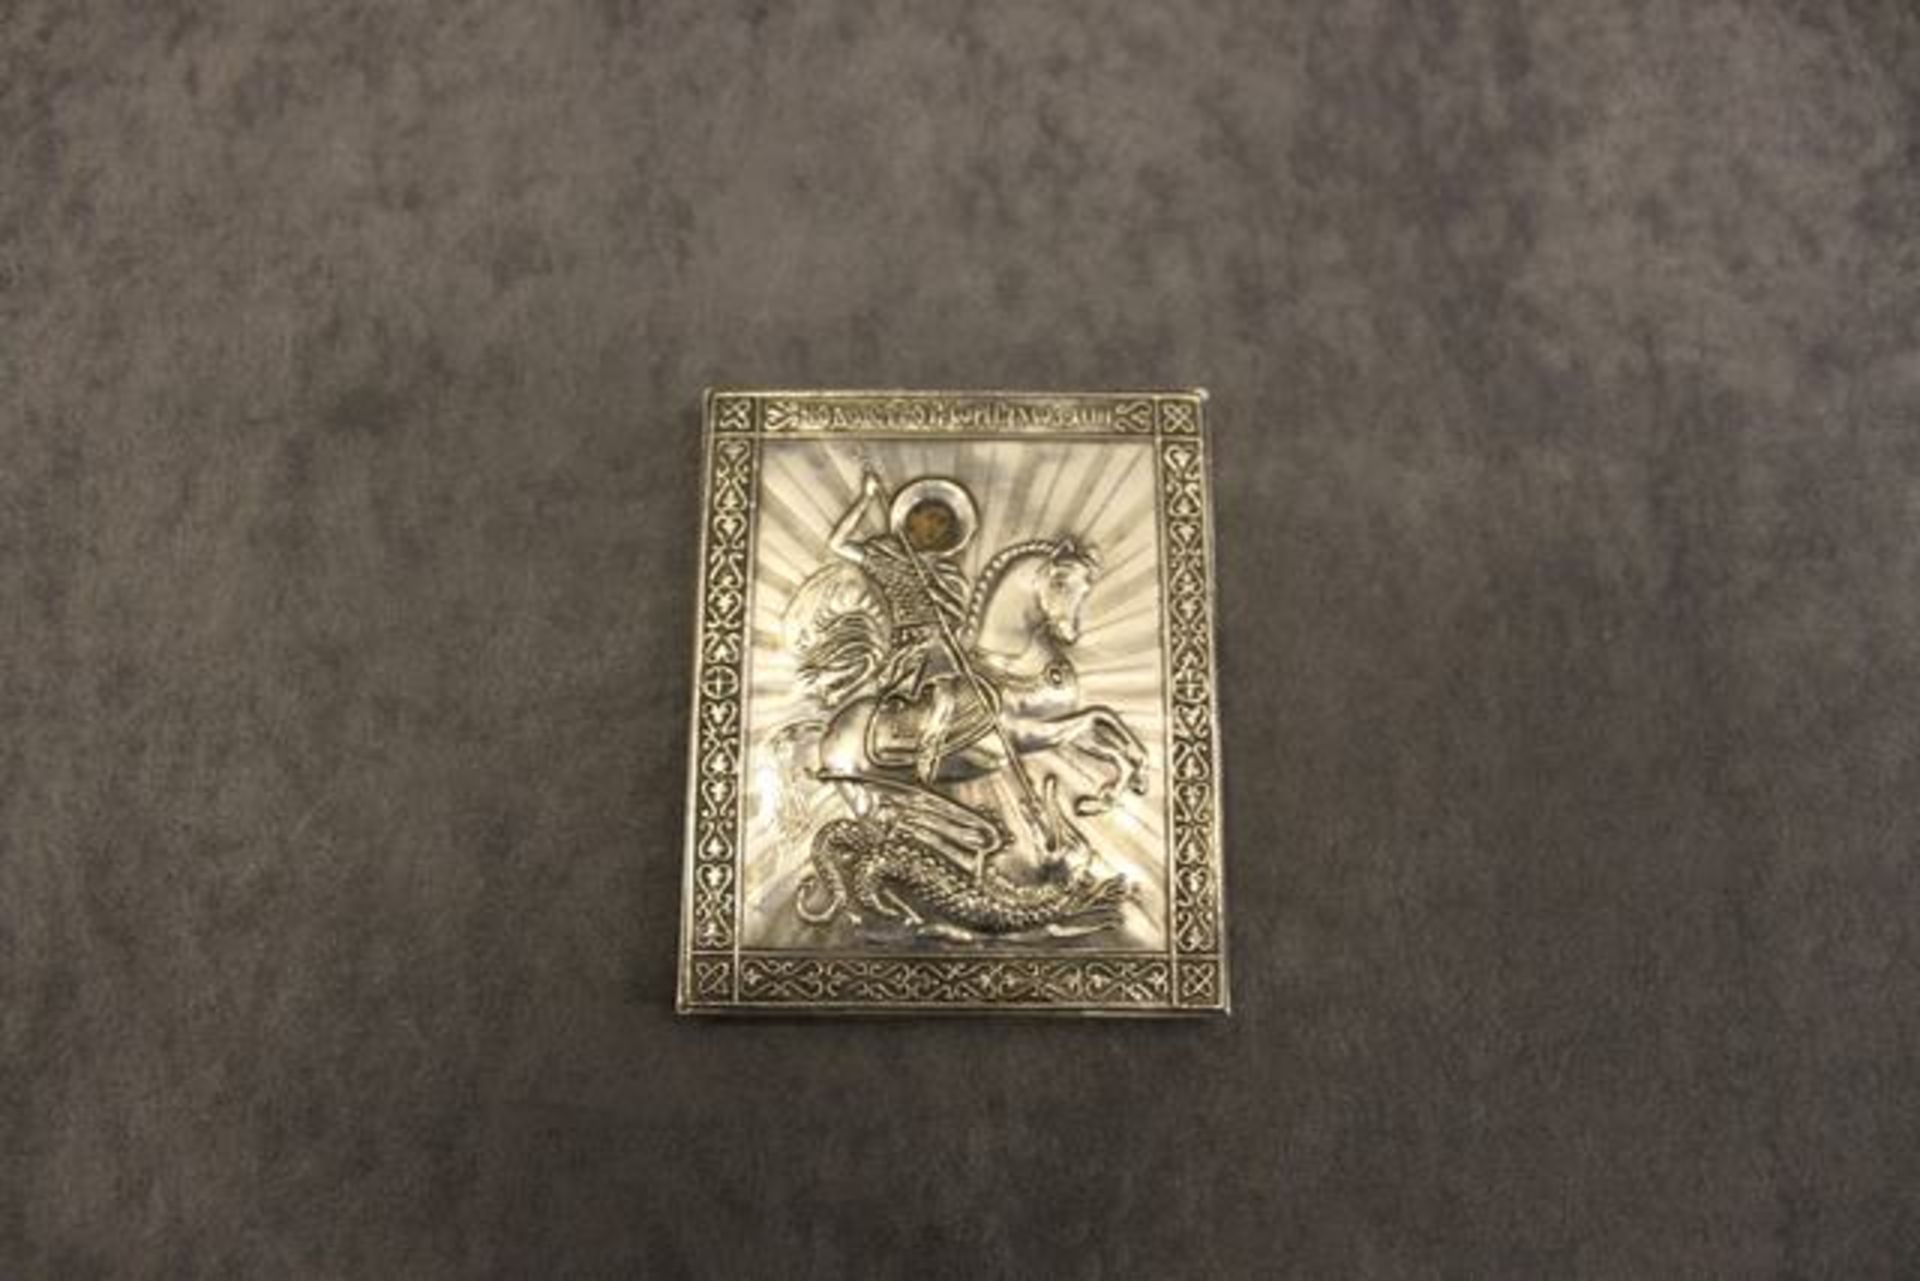 Russian  Silver 84 icon of St George slaying the dragon,   1890 assay mark of Aleksandr Timofeyevich - Image 2 of 2